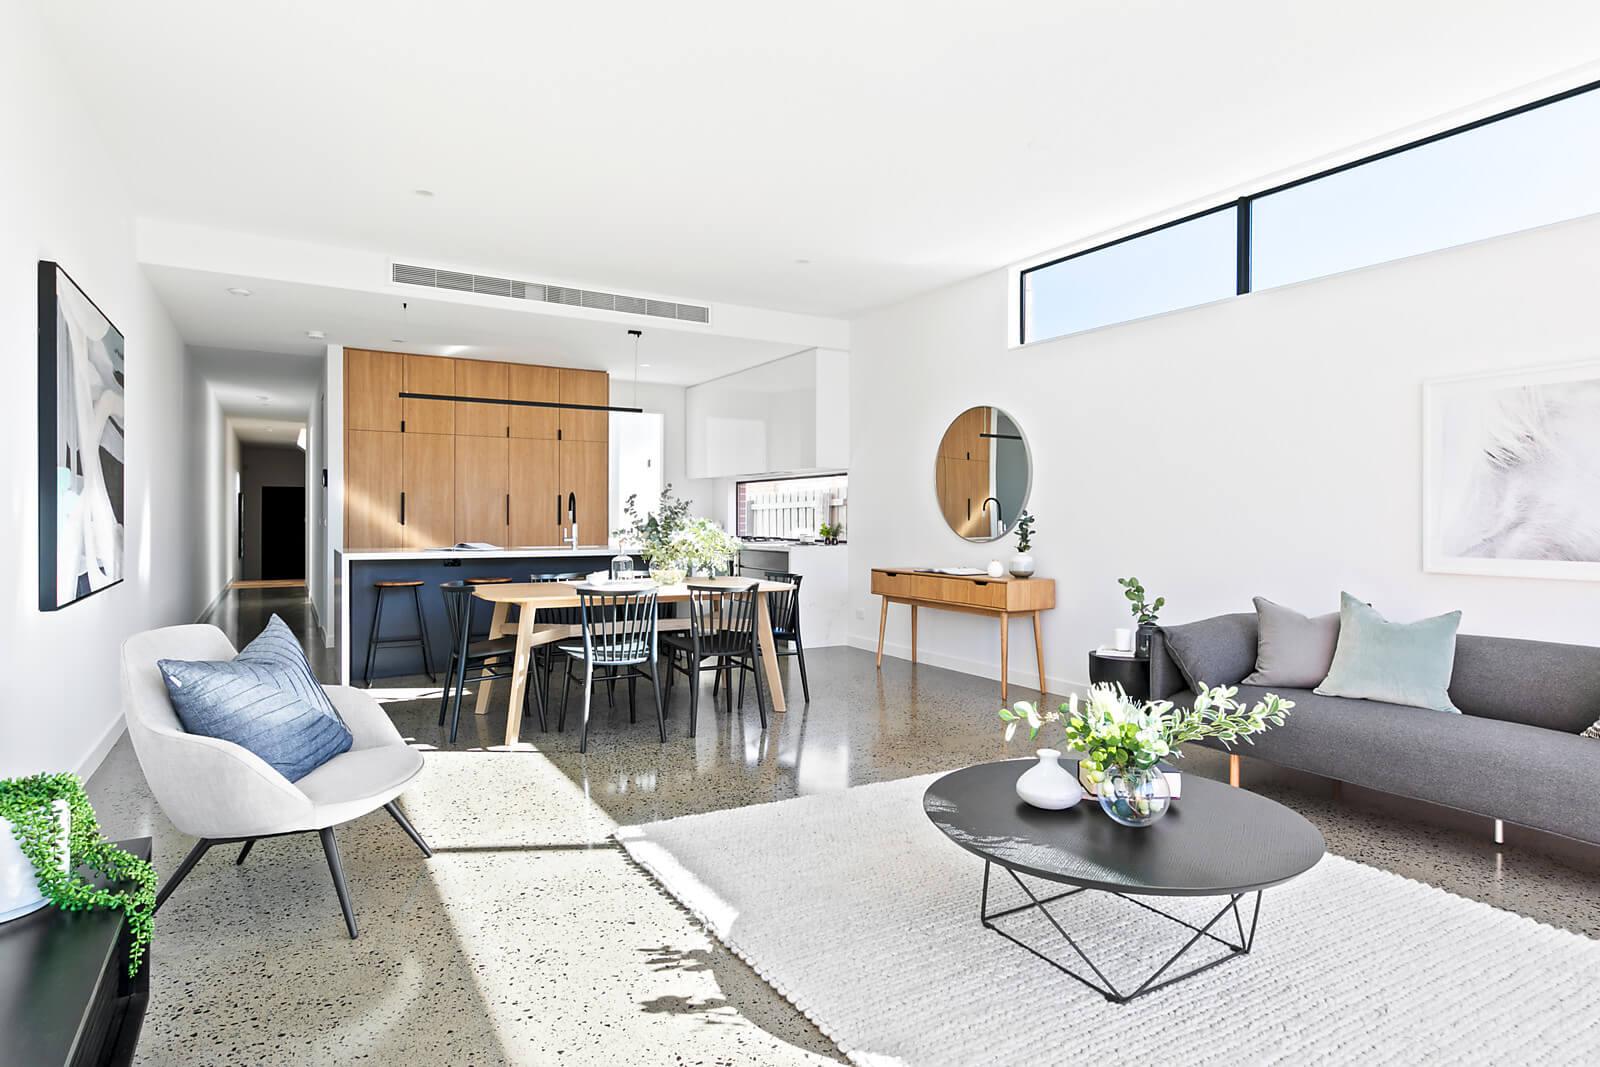 Light filled living room. Gray toned lounge, armchair and coffee table. Timber kitchen cupboards complemented with timber dining table and console. Green and white floral arrangements.